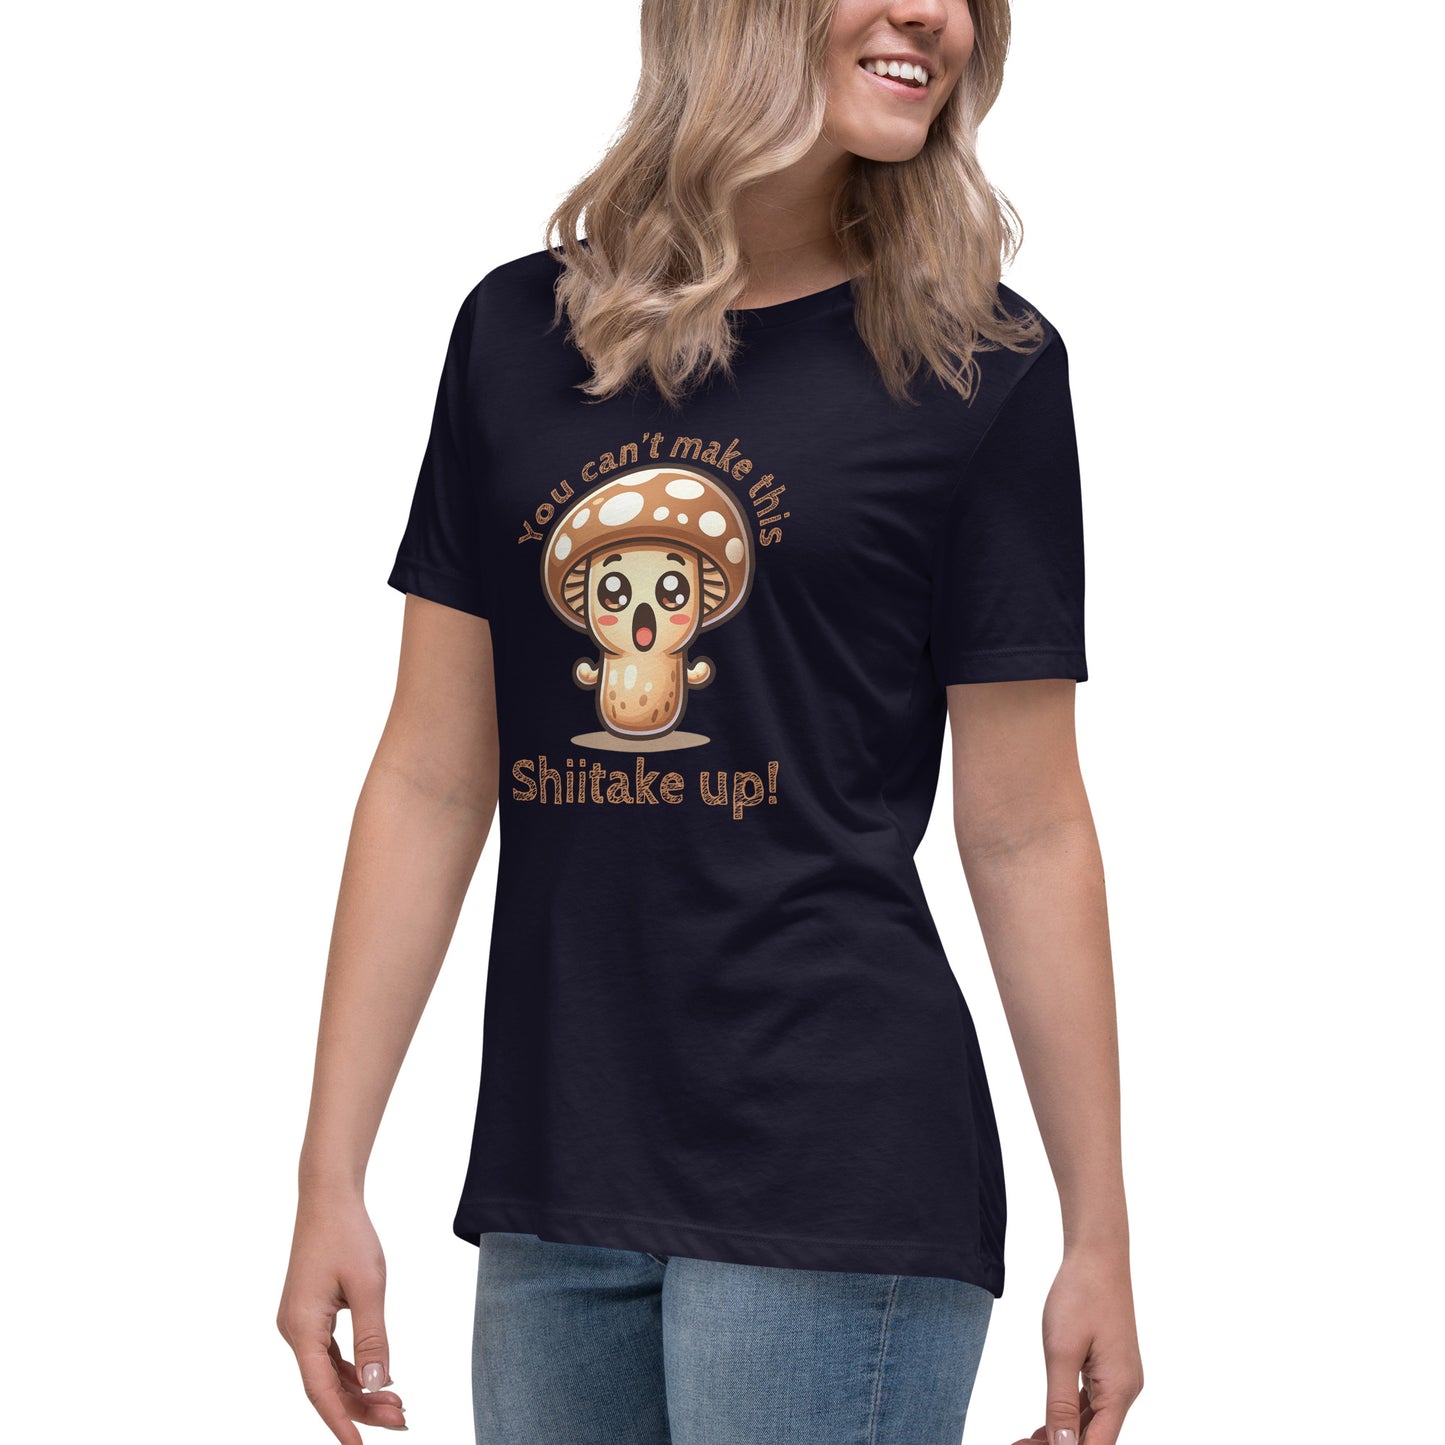 You Can't Make This Shiitake Up - Women's Relaxed T-Shirt